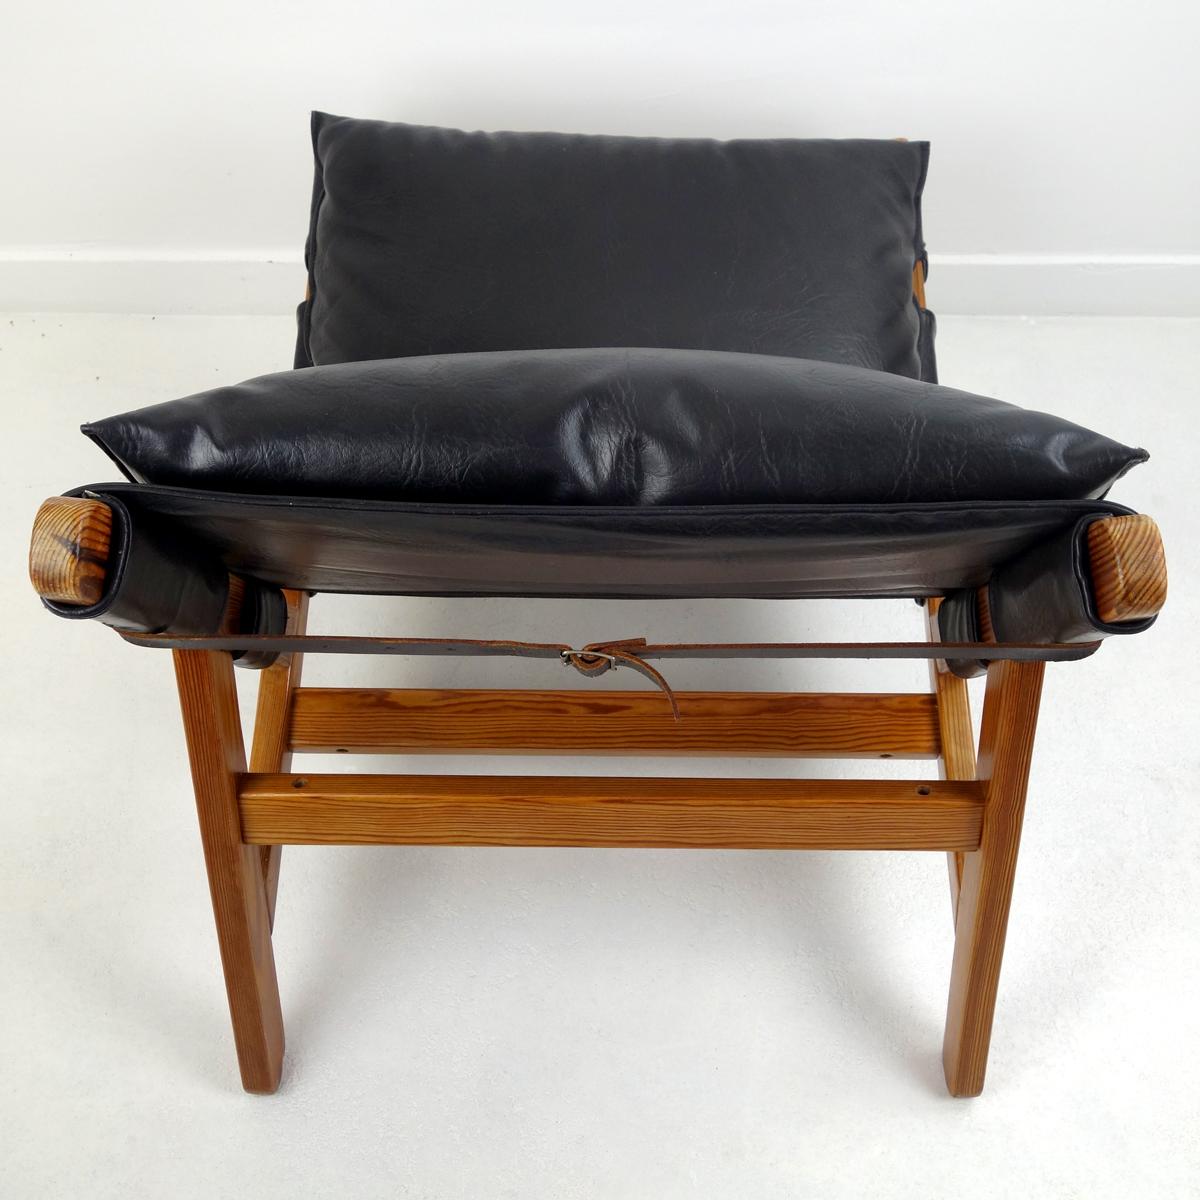 20th Century Midcentury Modern Easy Chair with Wooden Frame and Leather Cushions